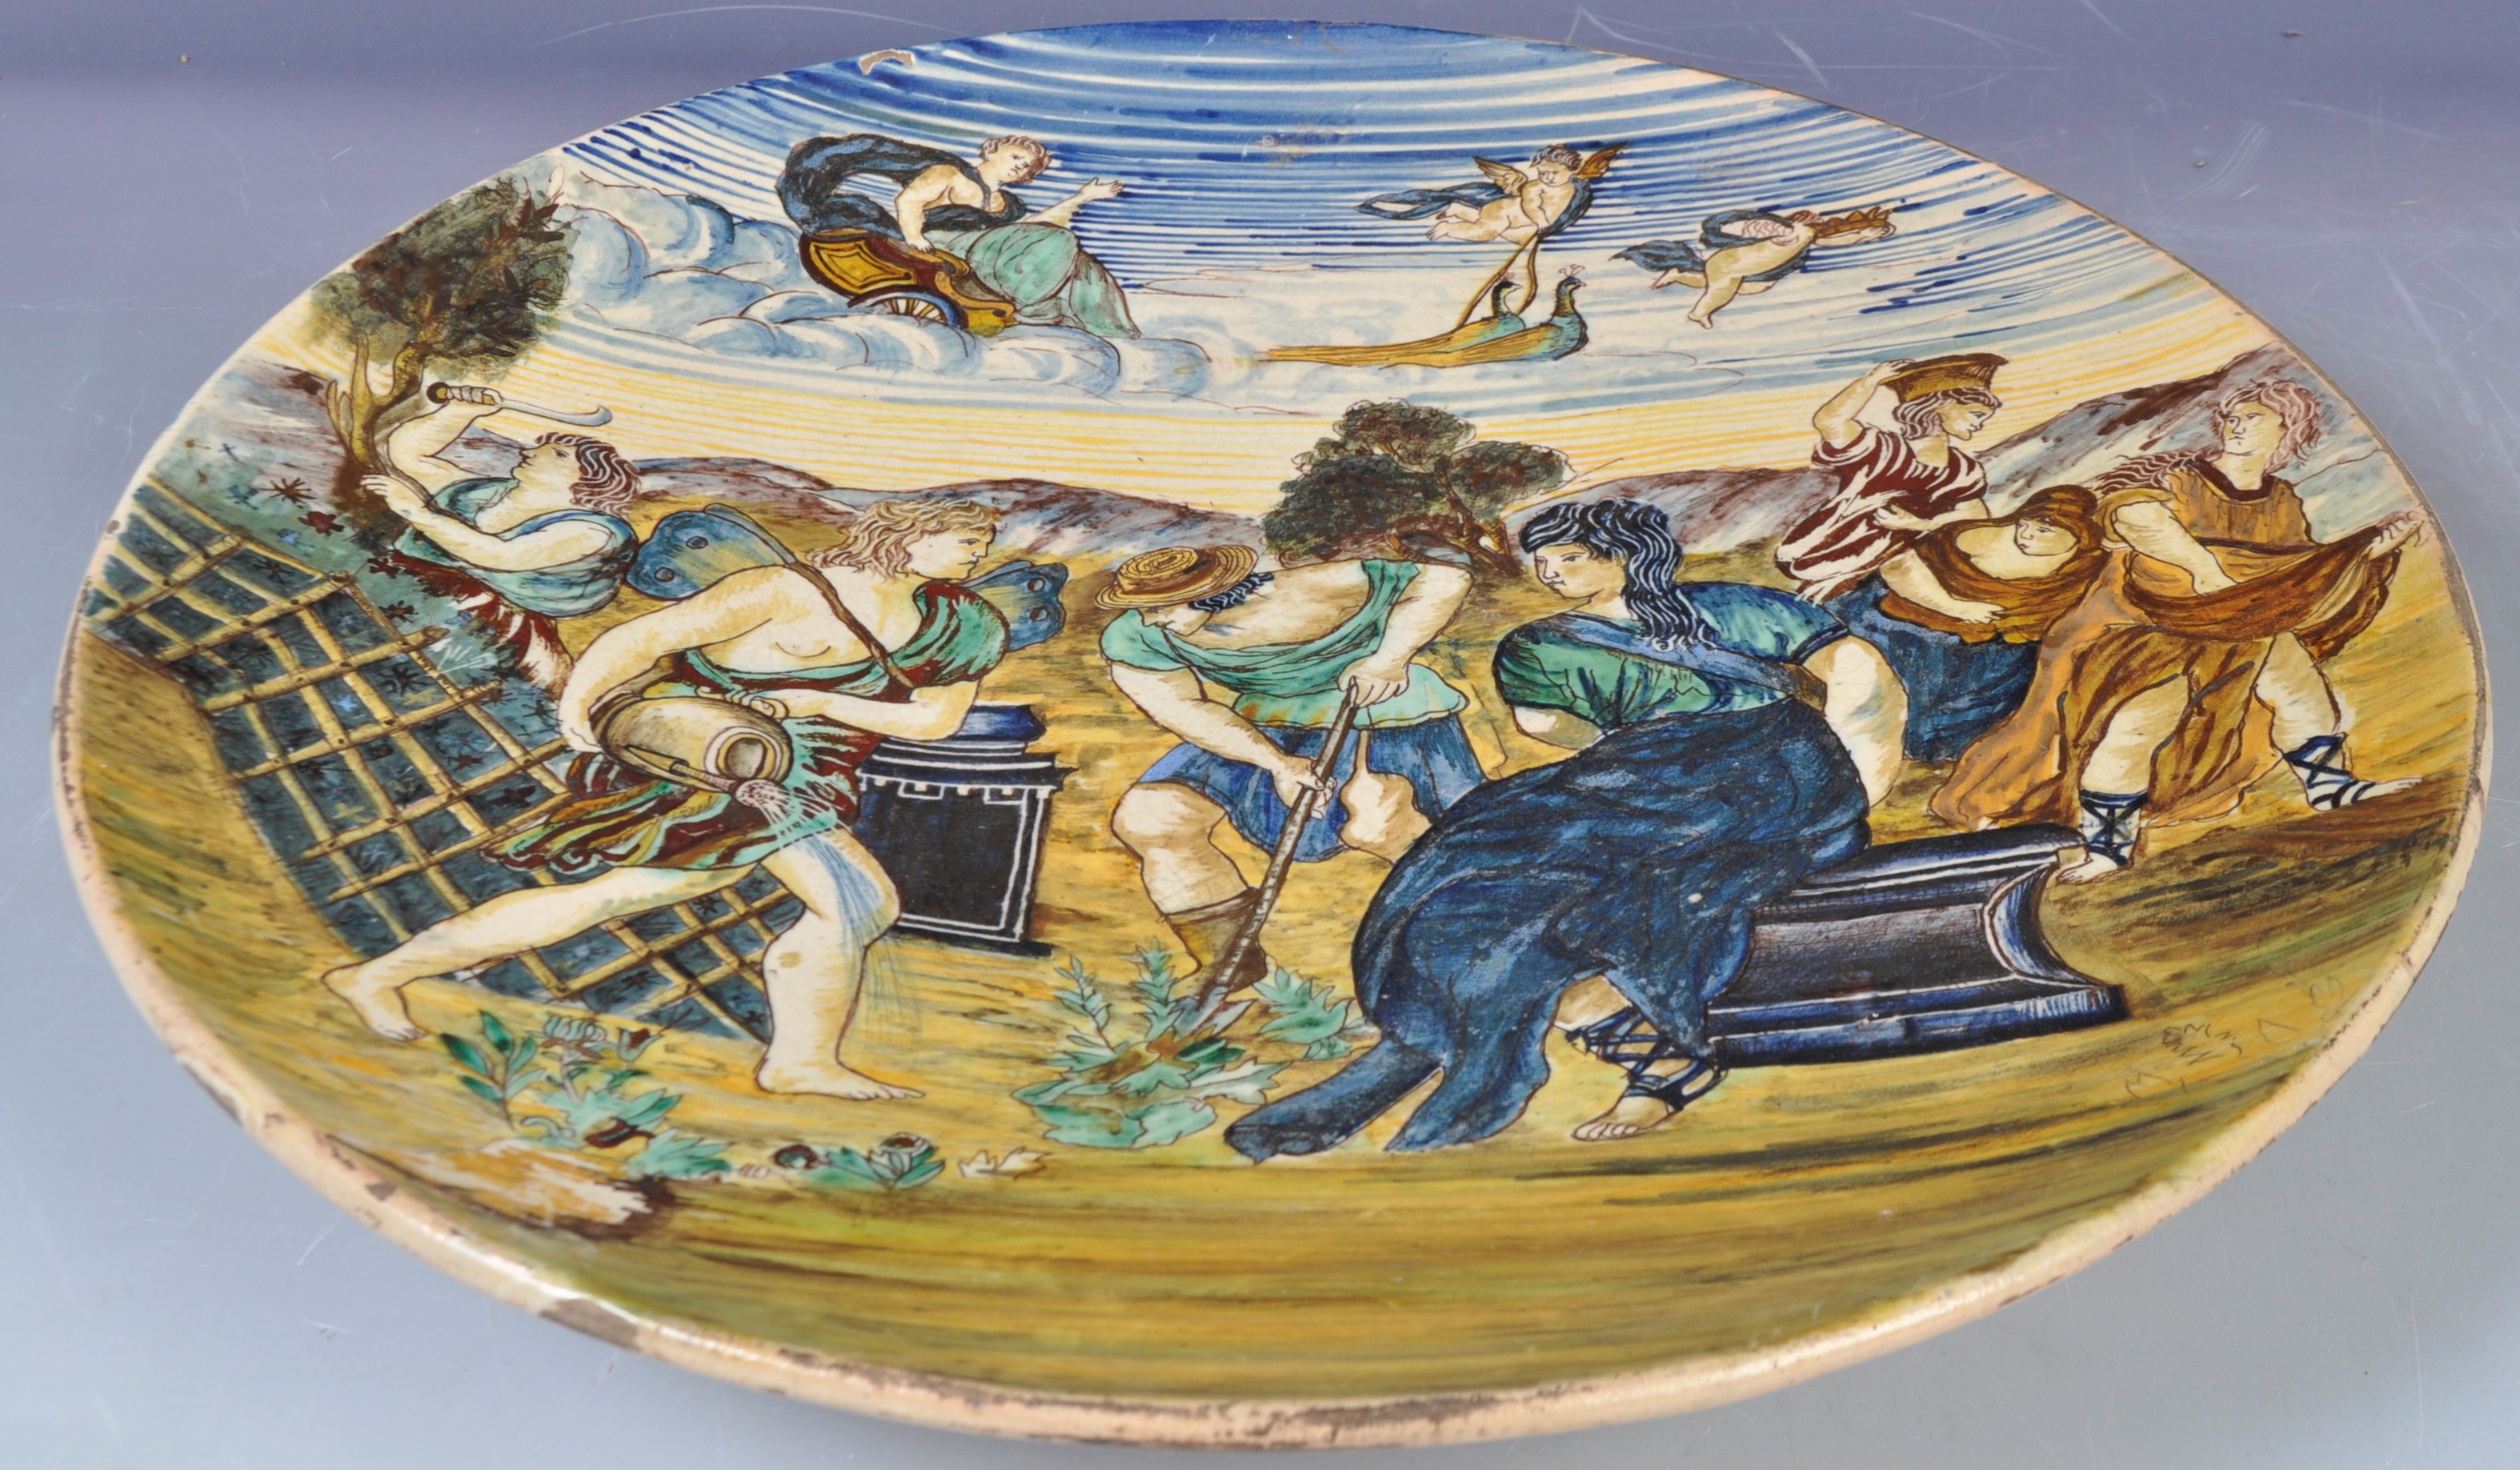 ANTIQUE ITALIAN MAIOLICA CHARGER WITH CLASSICAL SCENES - Image 8 of 8